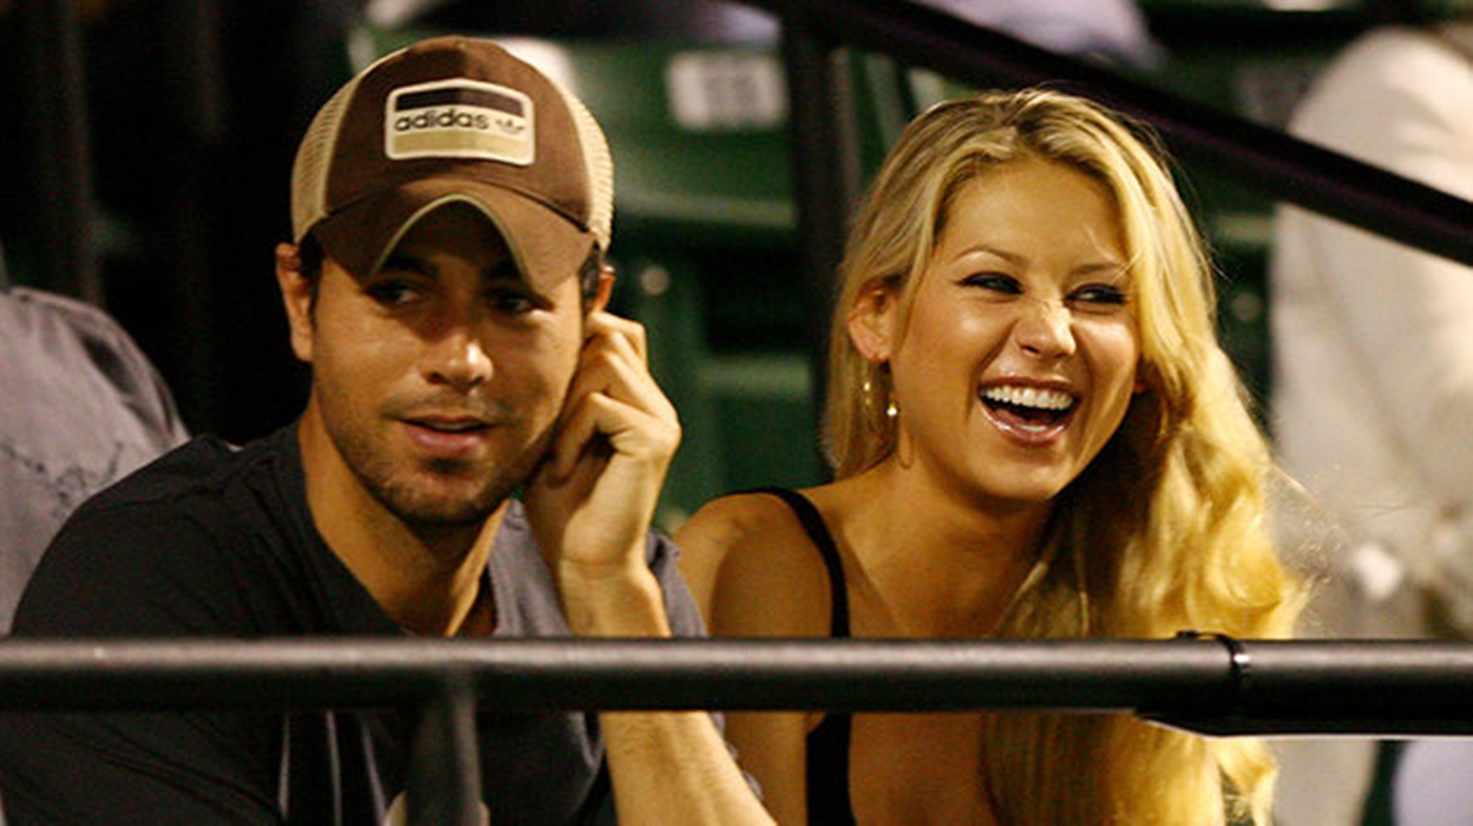 It happened. Enrique Iglesias and Anna Kournikova got married after 20